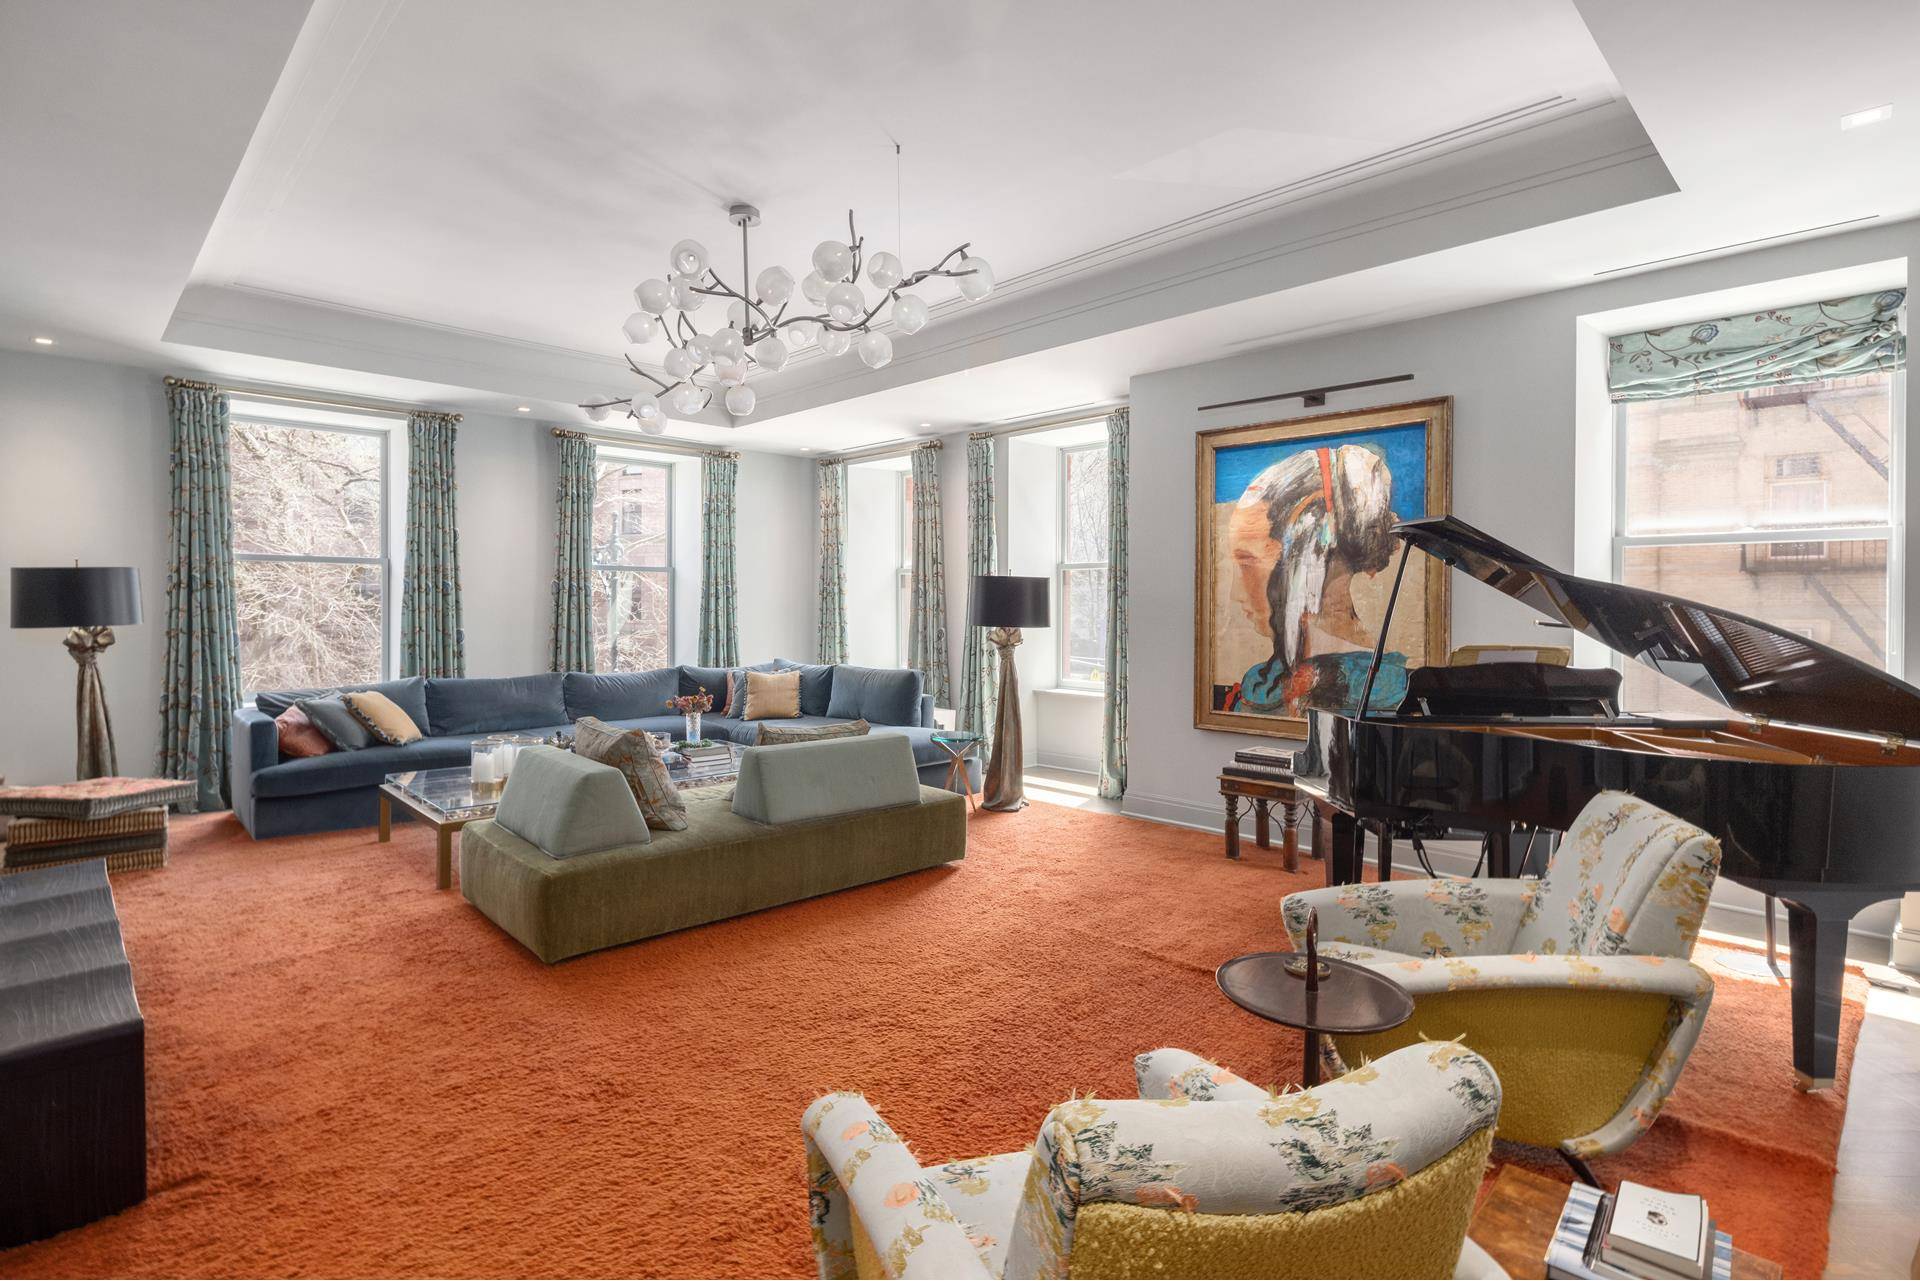 Welcome to 101 West 78th Street 3 A, a magnificent 7 room, 4 bedroom 3.